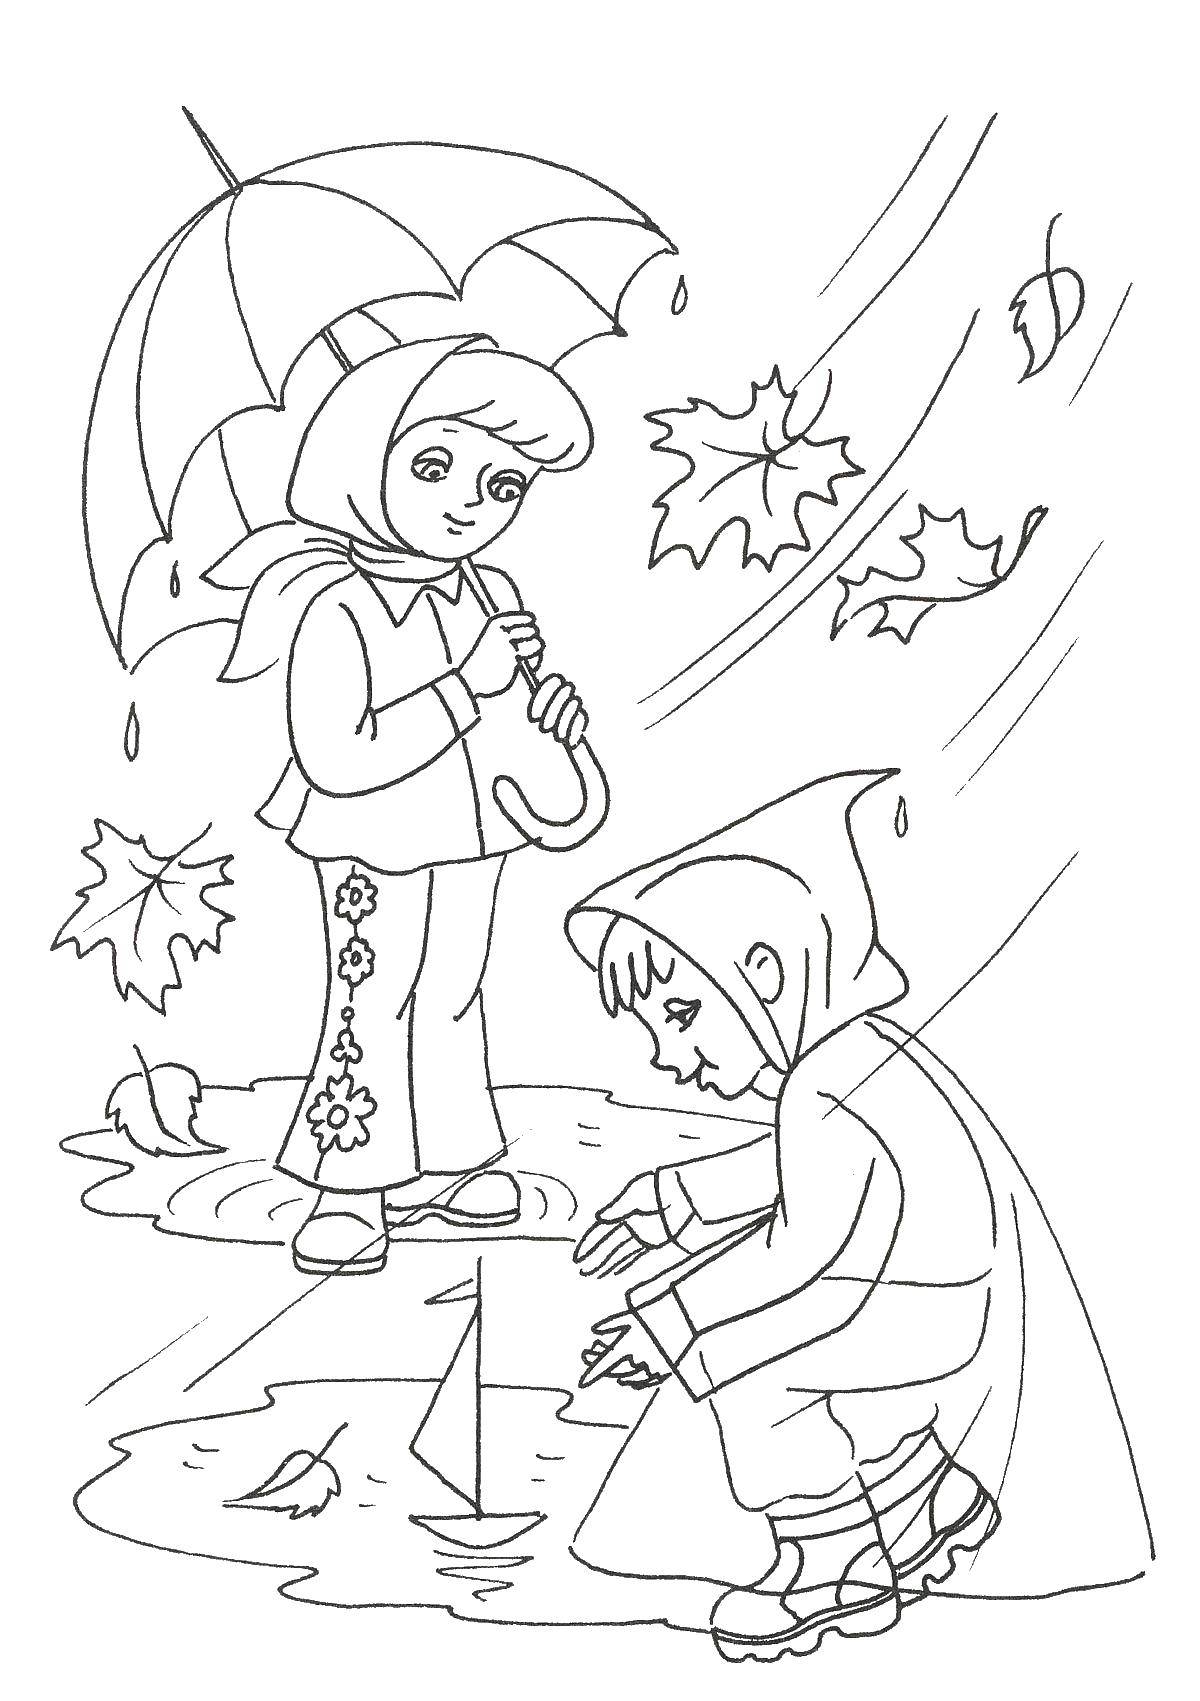 Coloring Children playing in the rain. Category People. Tags:  children, rain, umbrella.